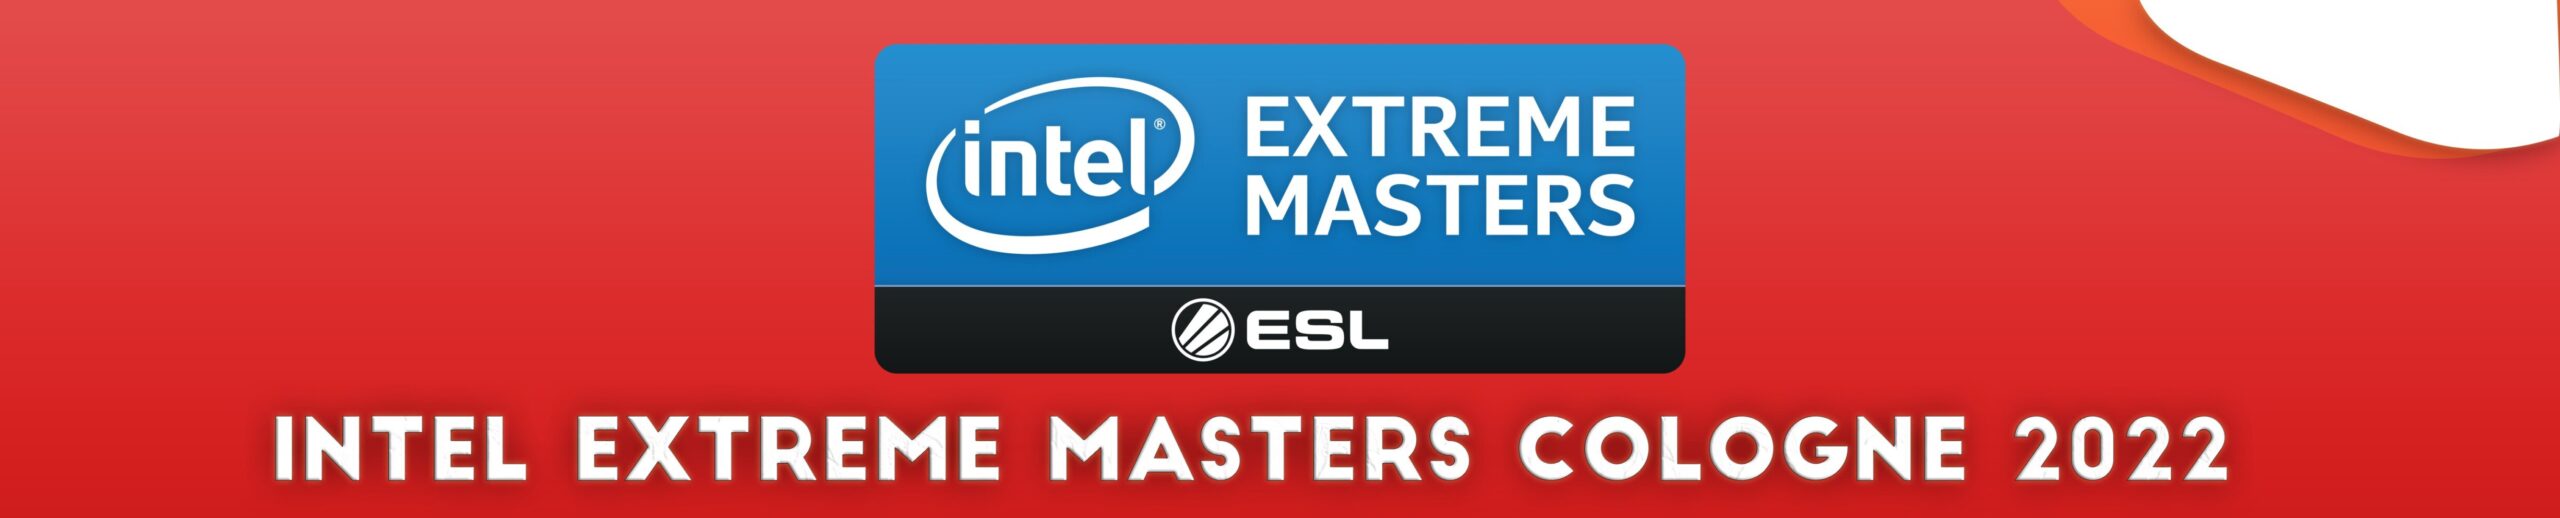 Intel Extreme Masters Cologne 2022 1